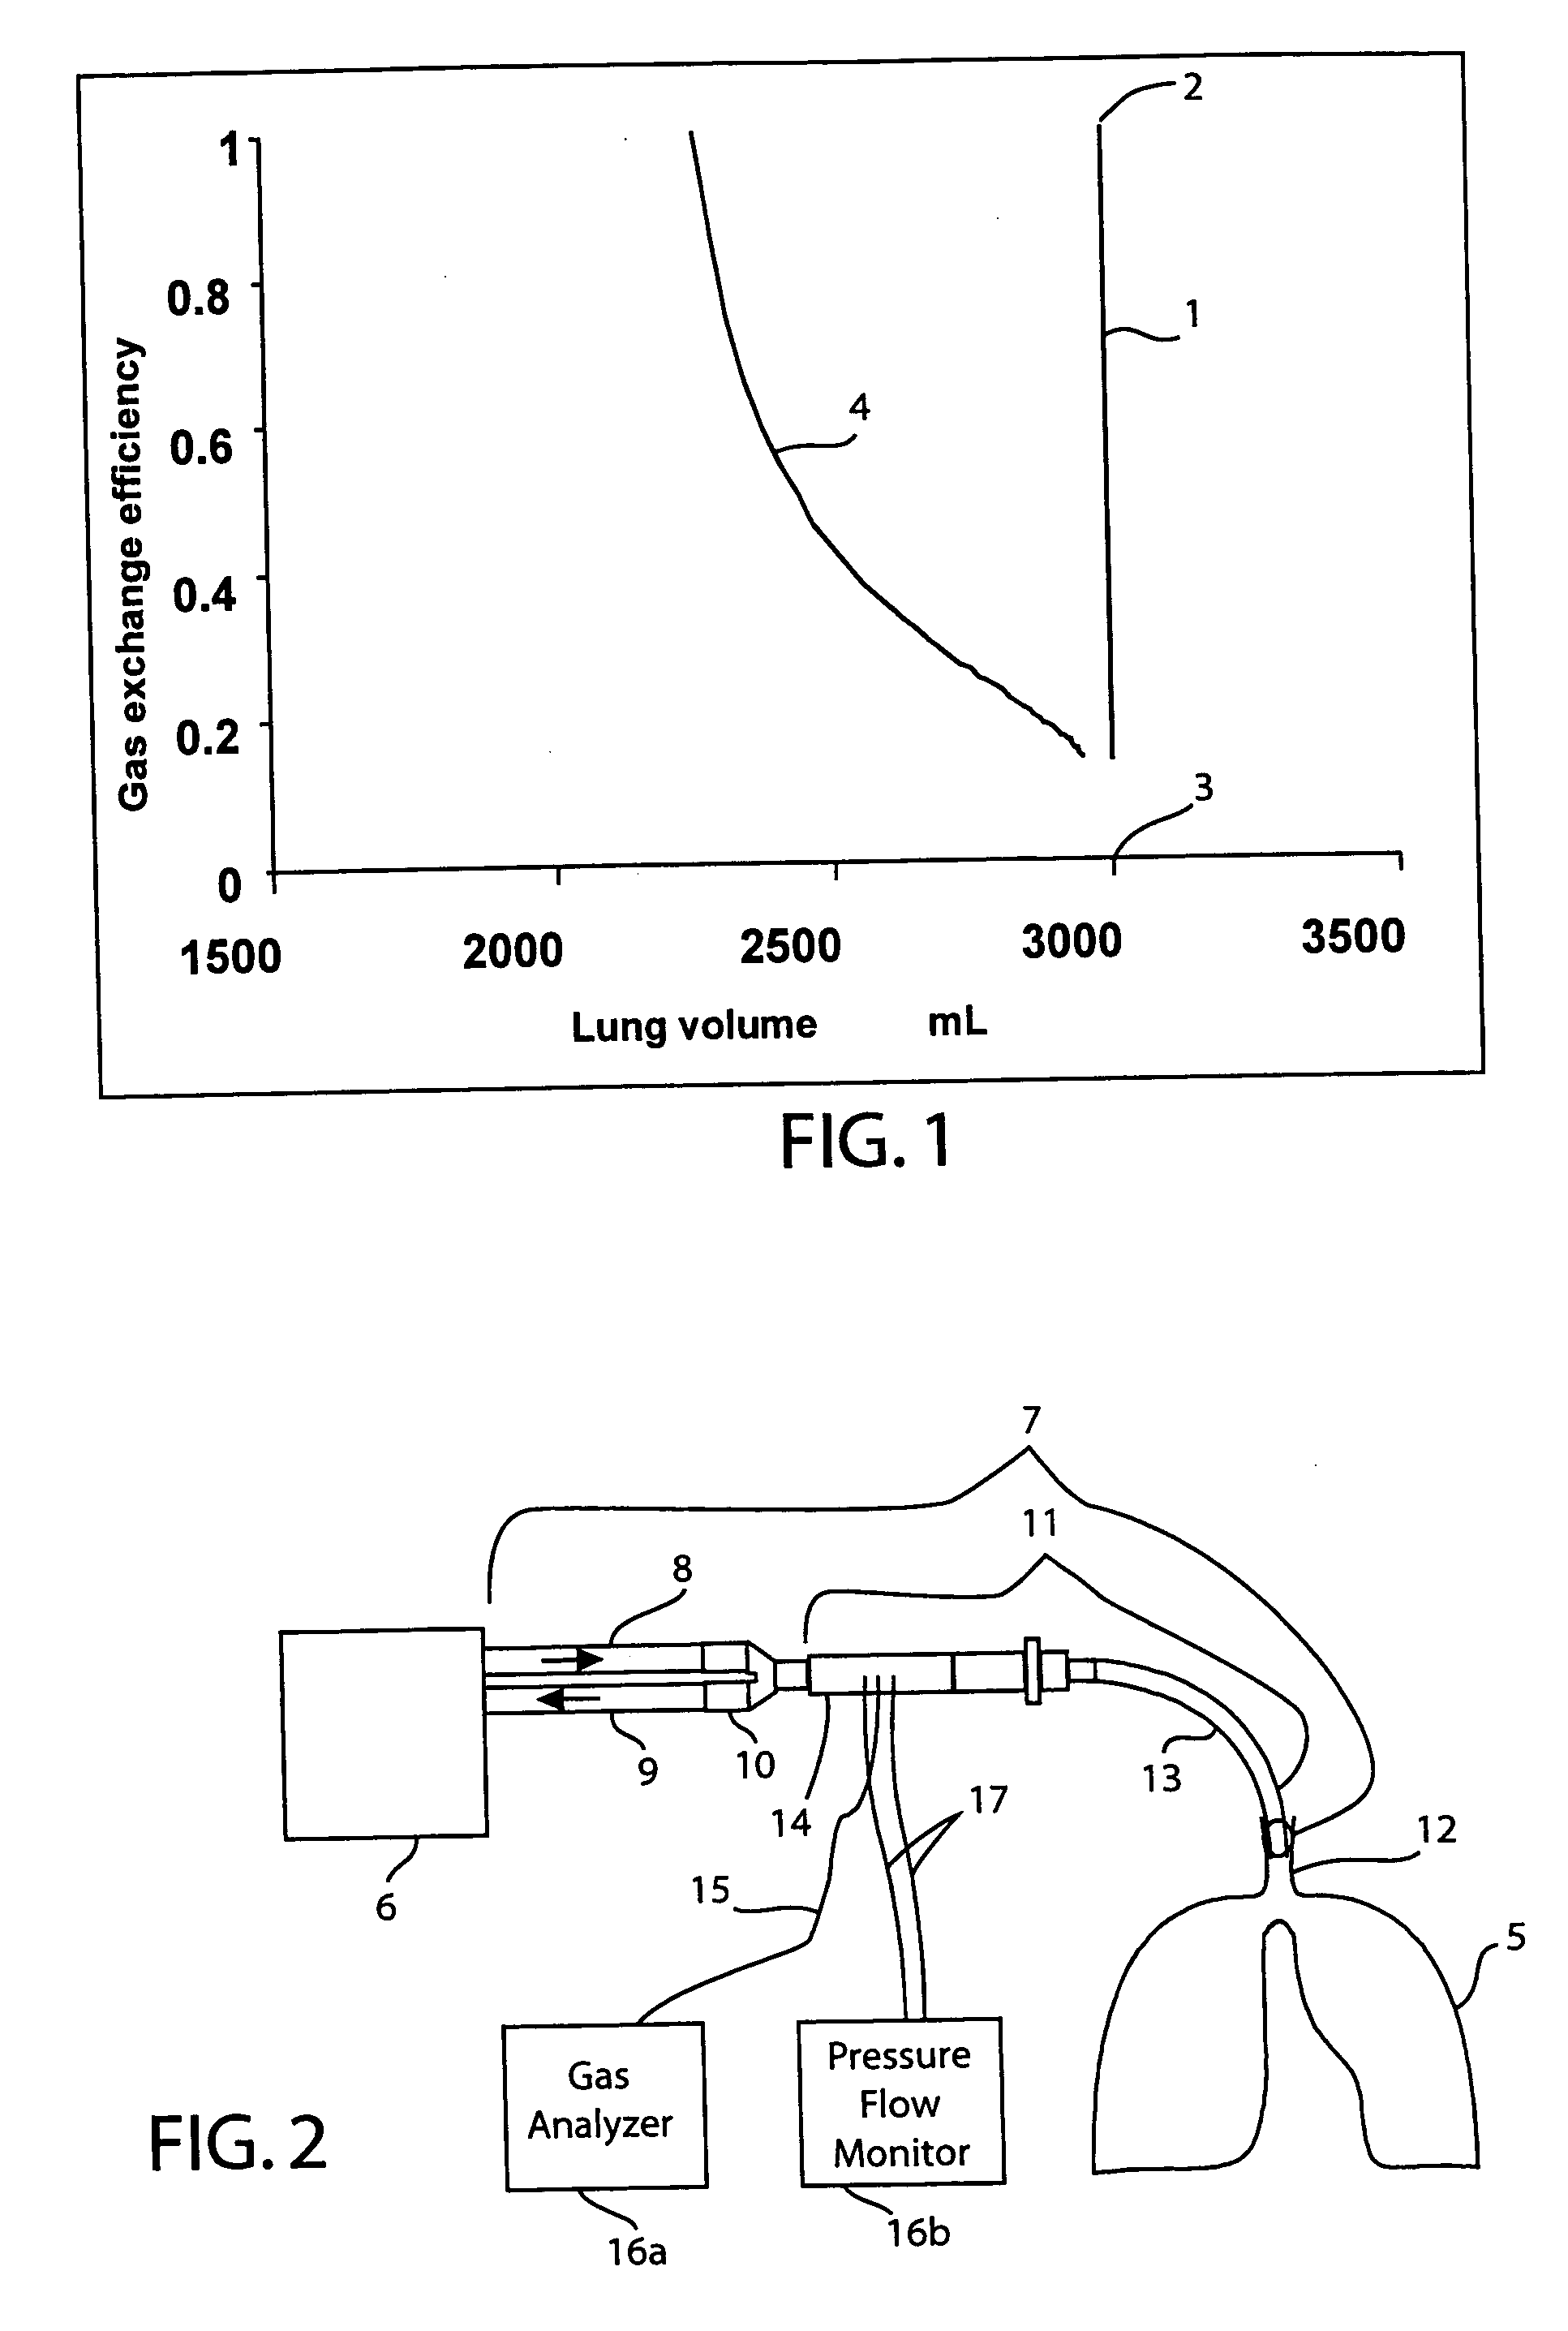 Method for indicating the amount of ventilation inhomgeneity in the lung